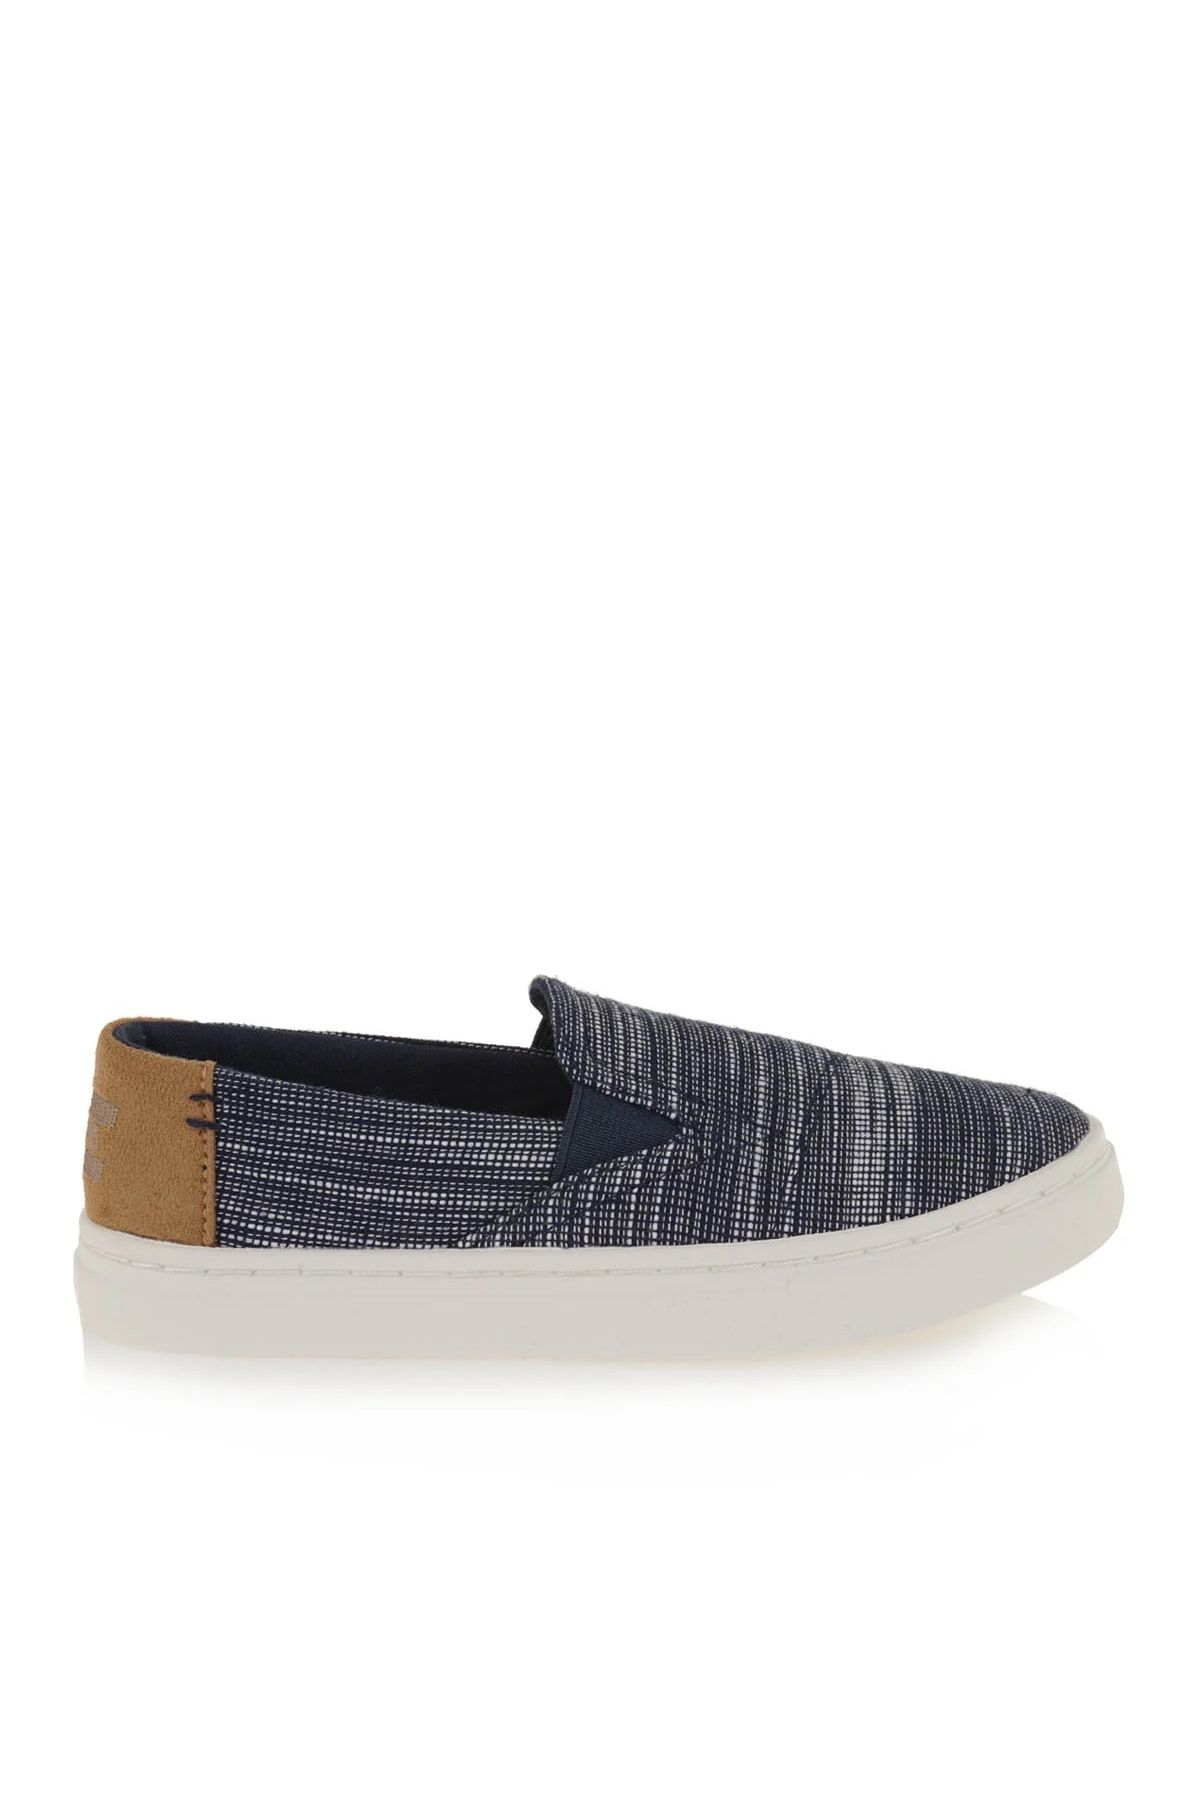 Toms LUCA NAVY STRIPED CHAMBRAY